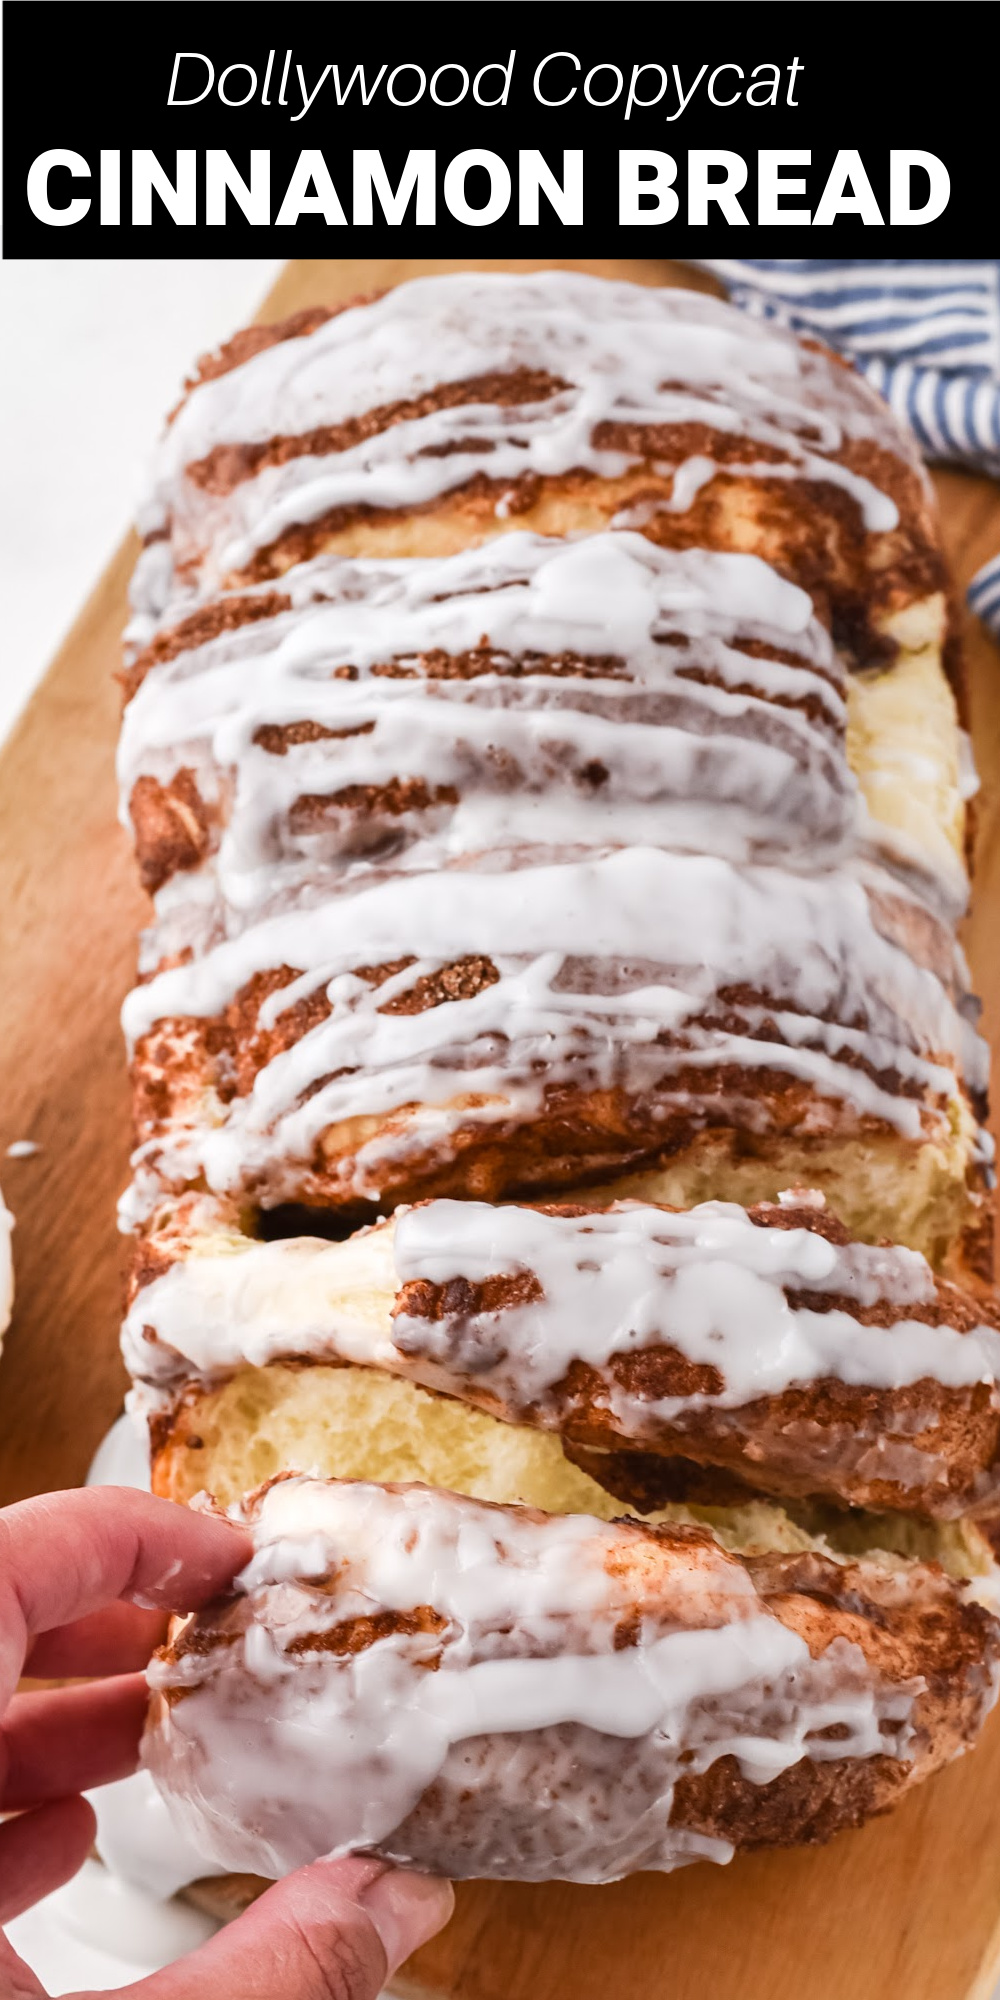 This warm and inviting pull apart Dollywood Cinnamon Bread is tender and moist and absolutely irresistible. Inspired by the cinnamon bread from the famous theme park, this is a quick and easy no-knead recipe that always turns out prefect, even for the most inexperience bakers.